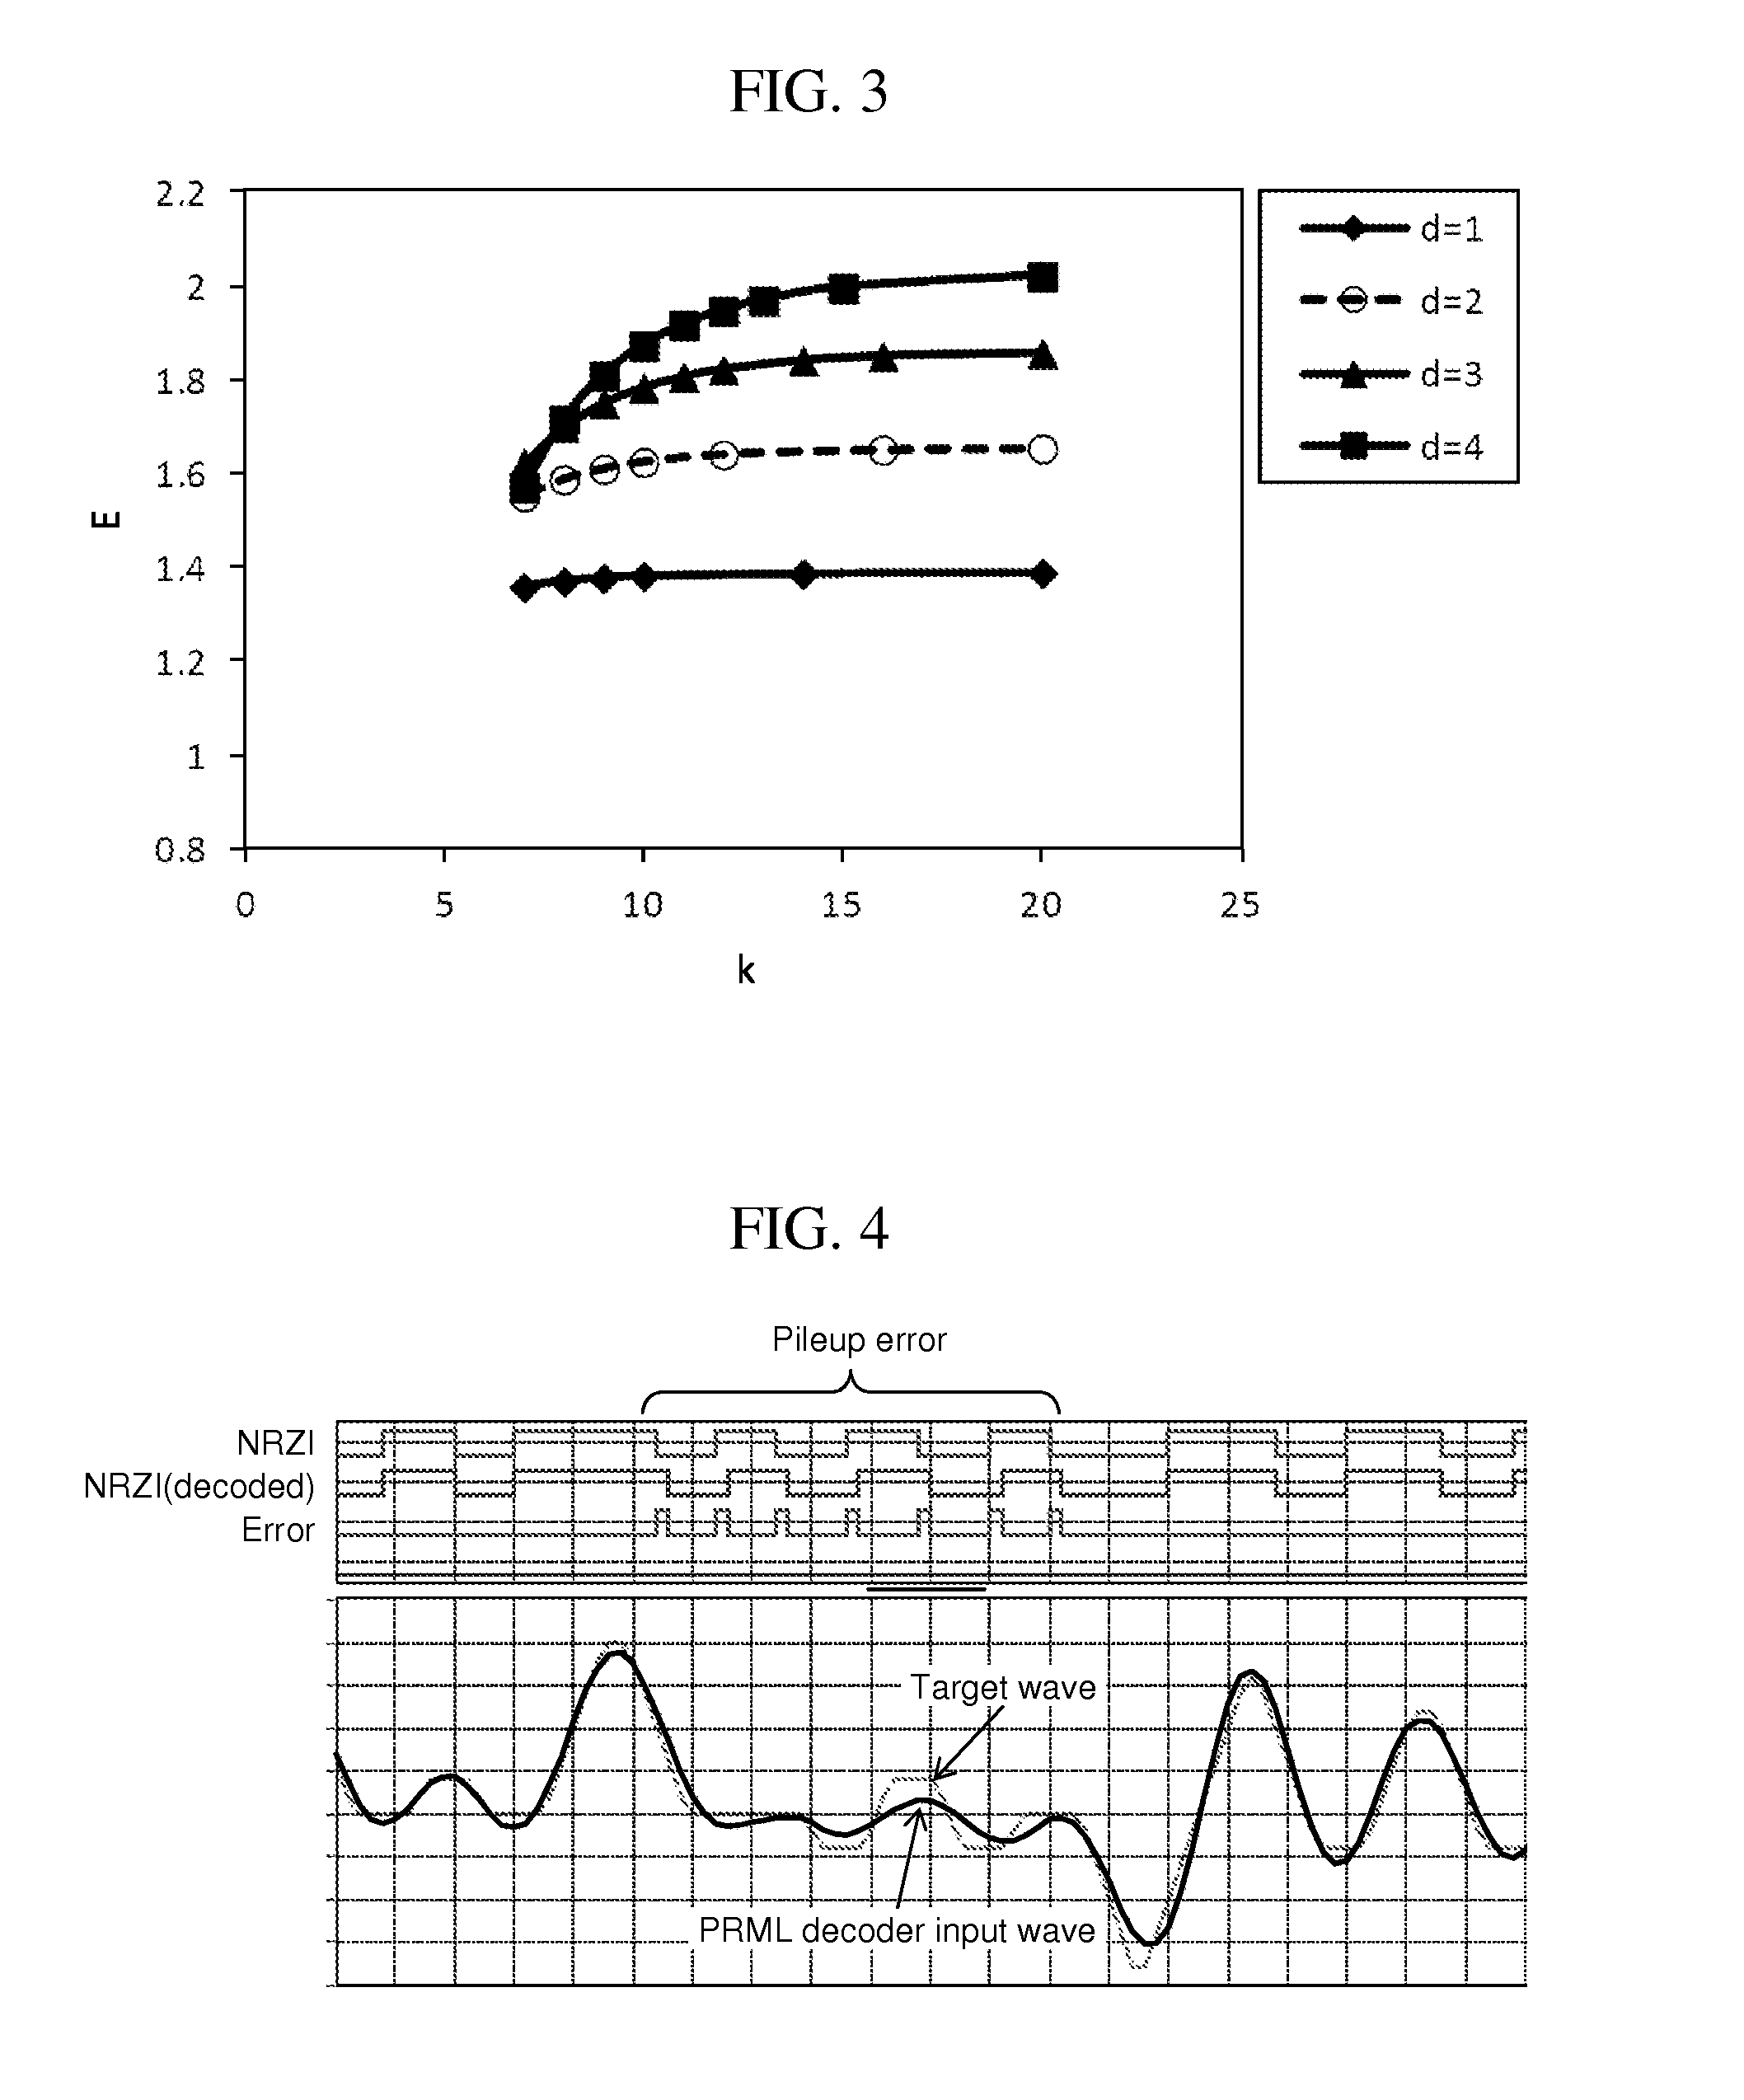 Channel bitword prosessor, prml decoder, and optical information recording/reproducing device